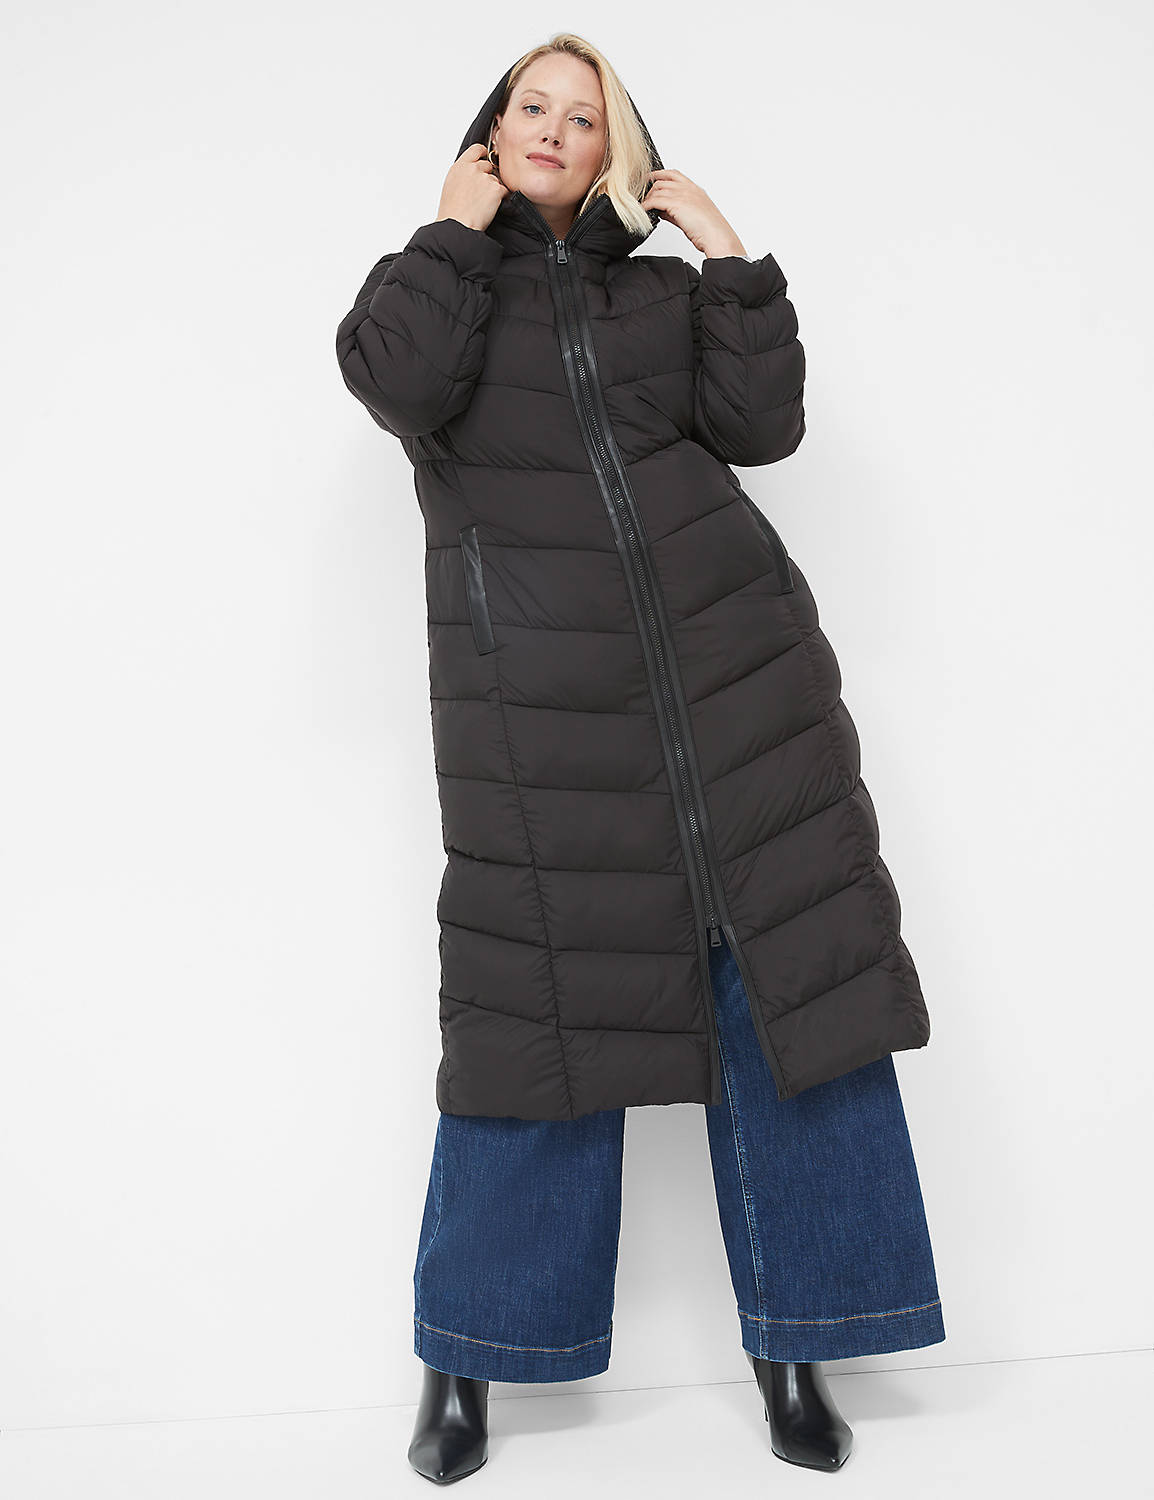 Front Zip Maxi Puffer 1136981 Product Image 4